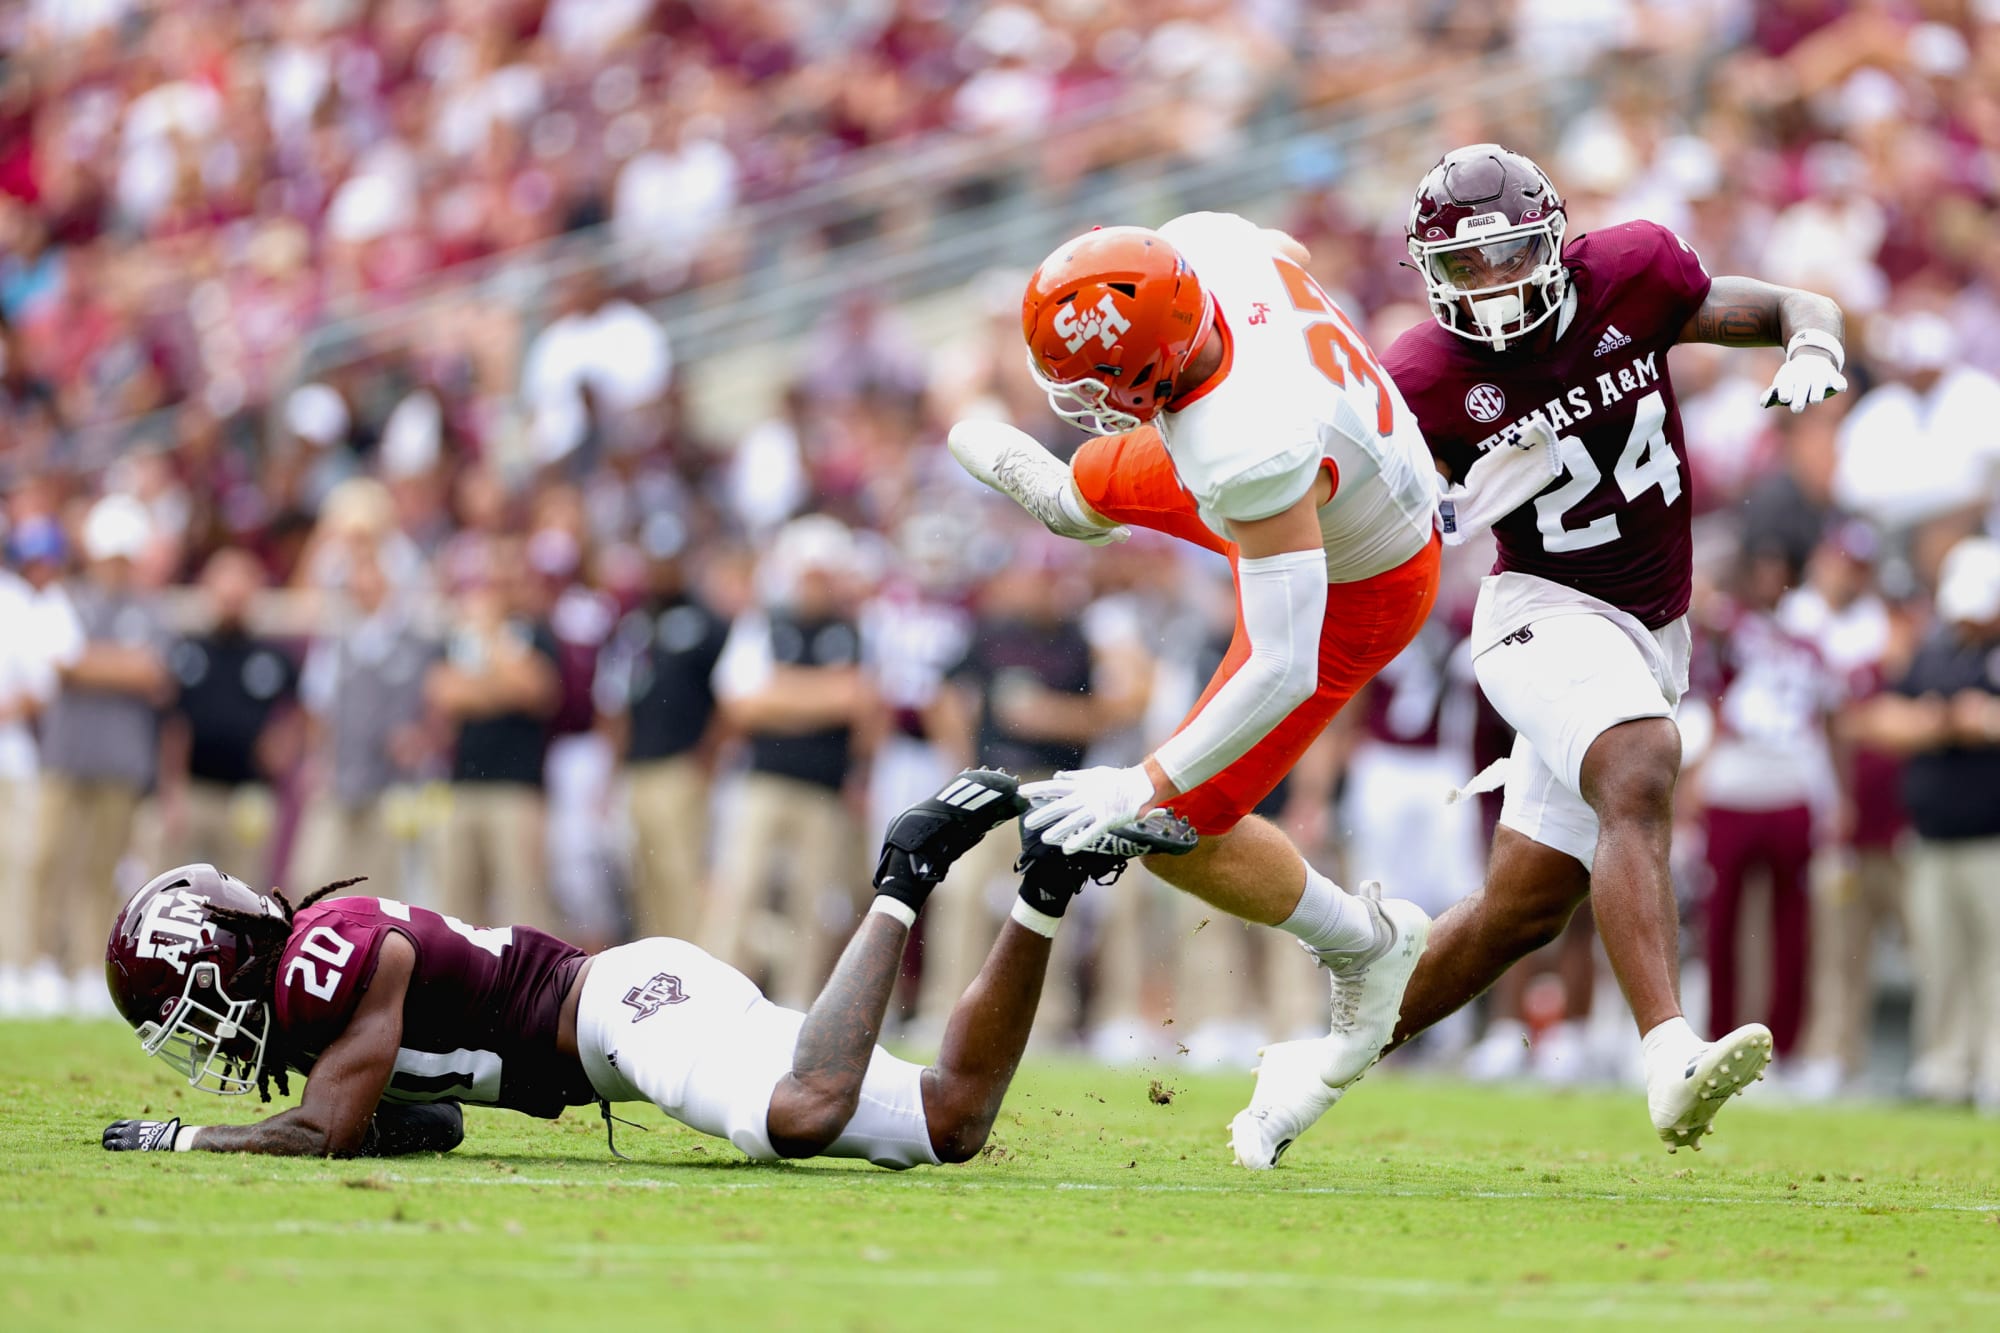 Texas A&M Football: Studs and duds from Week 1 vs. Sam Houston State